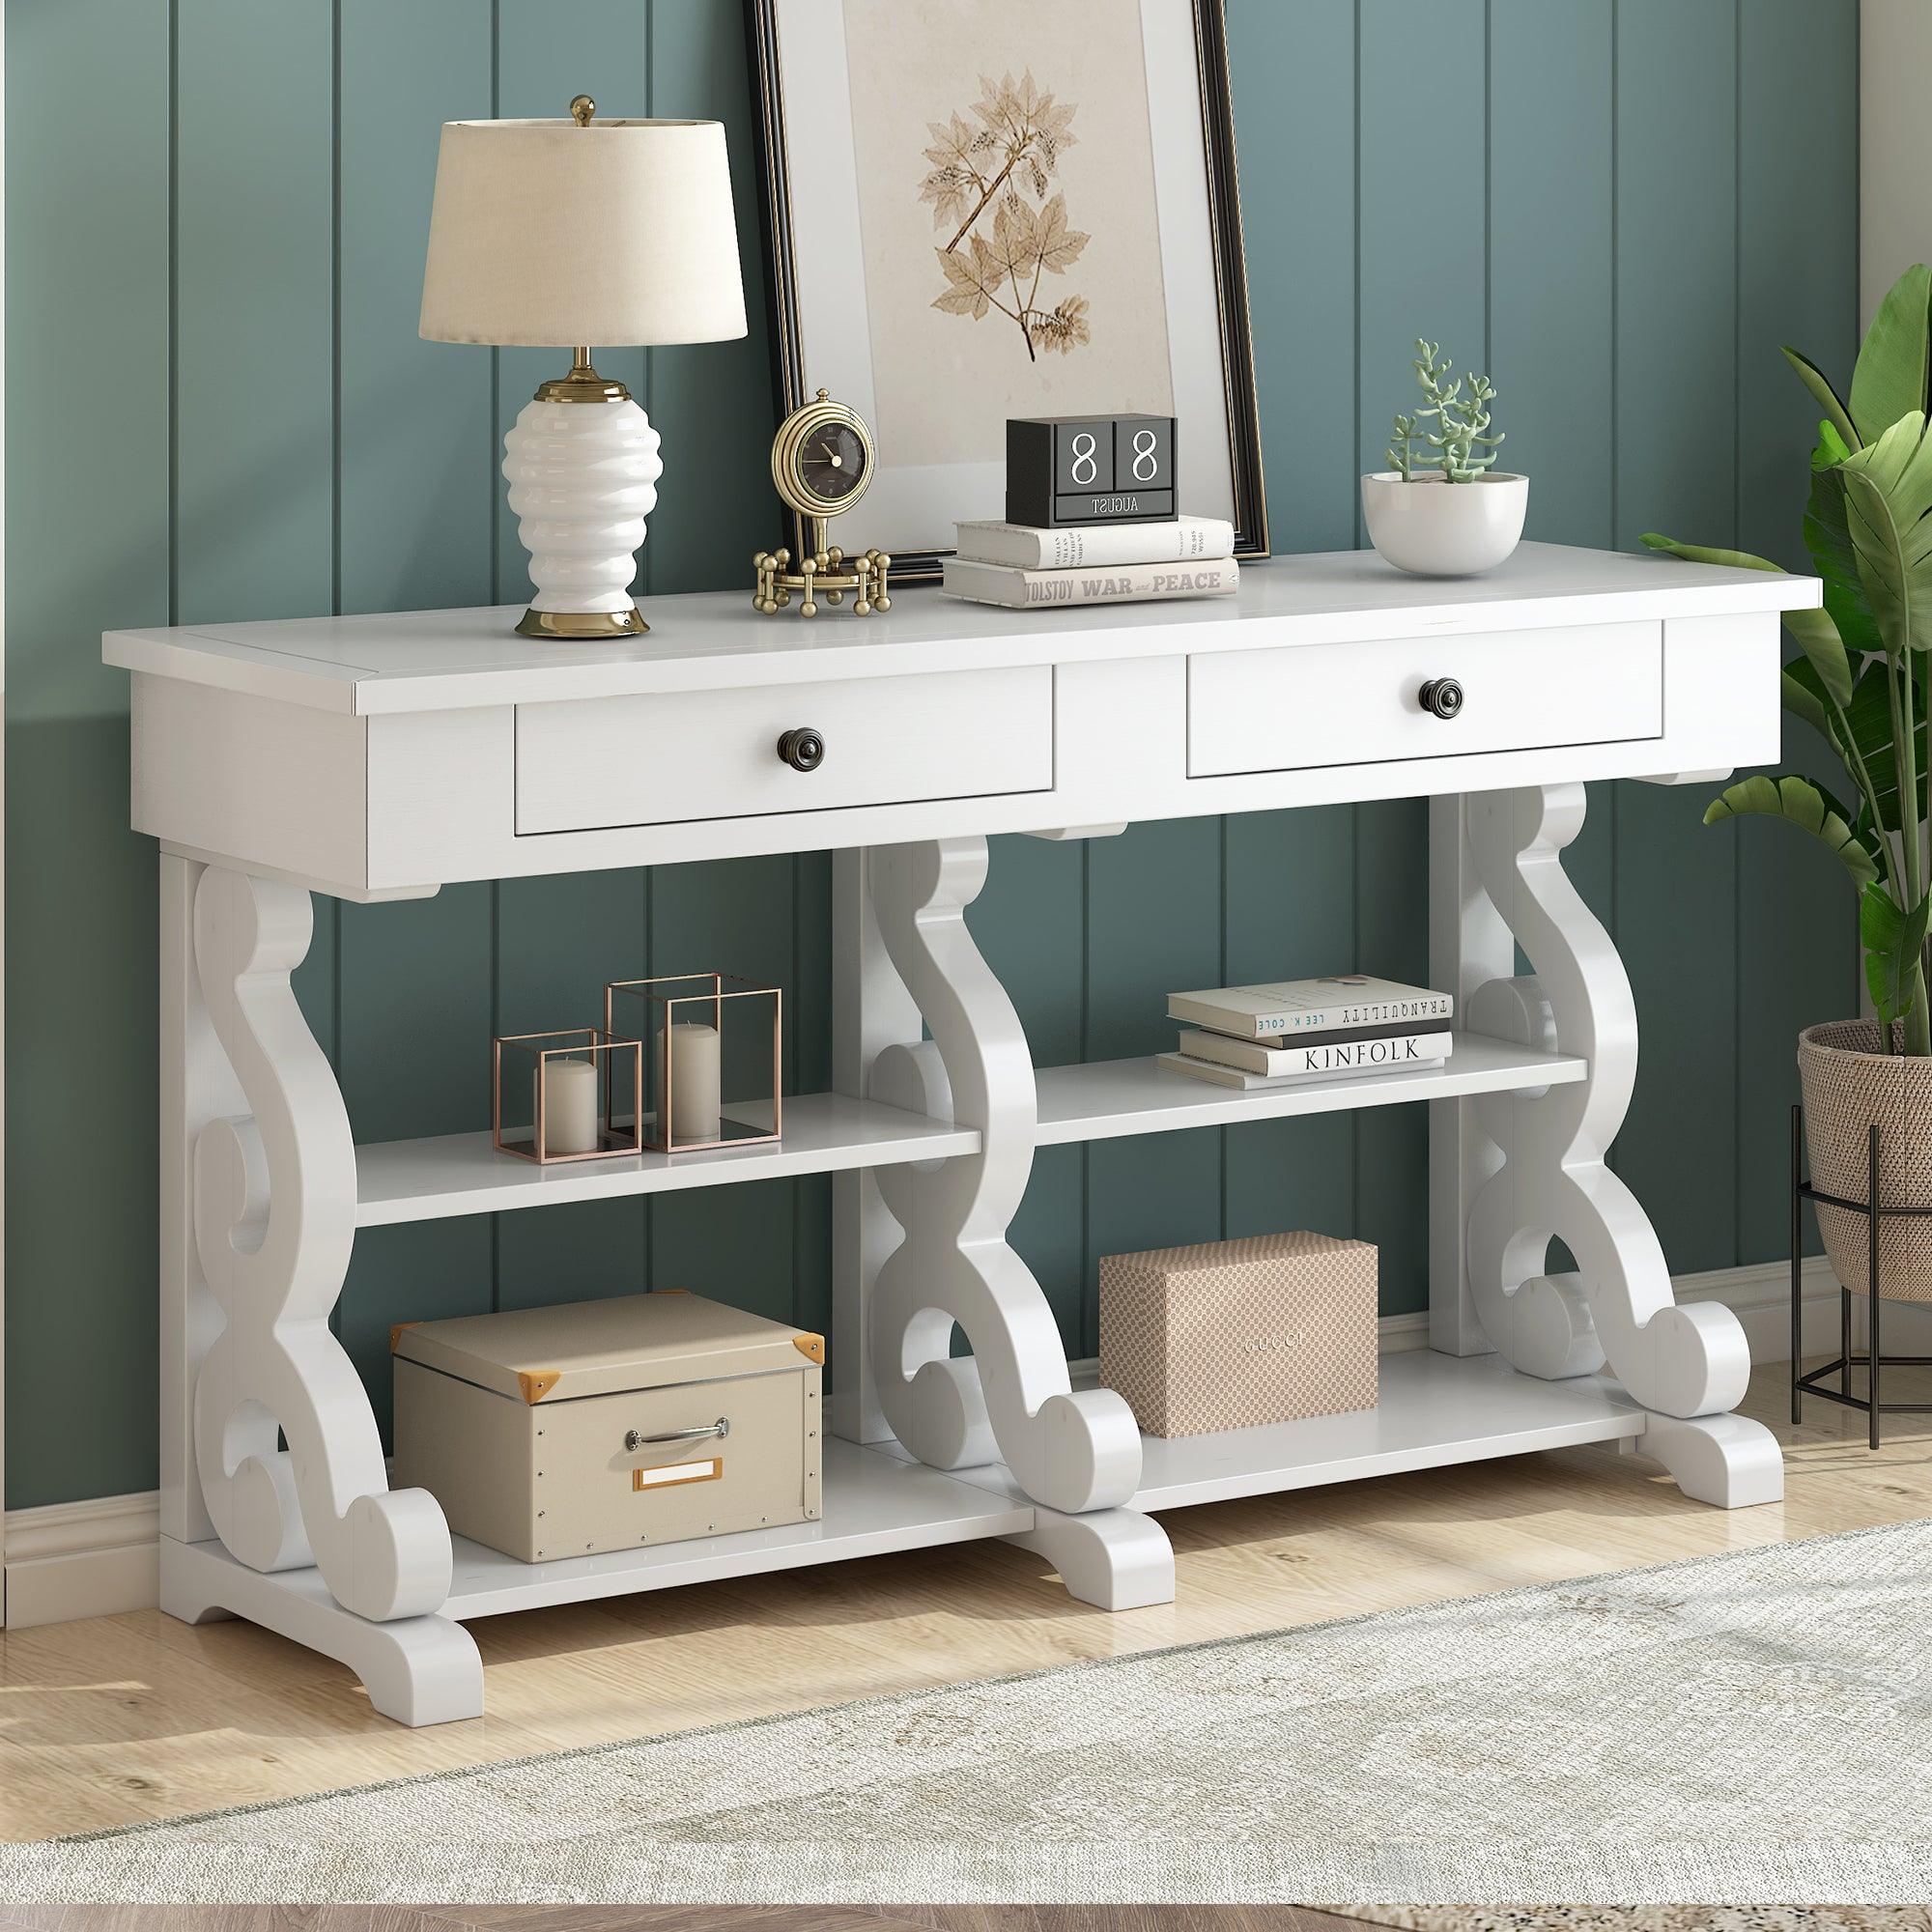 🆓🚛 Retro Console Table/Sideboard With Ample Storage, Open Shelves & Drawers for Entrance, Dinning Room, Living Room (Antique White)